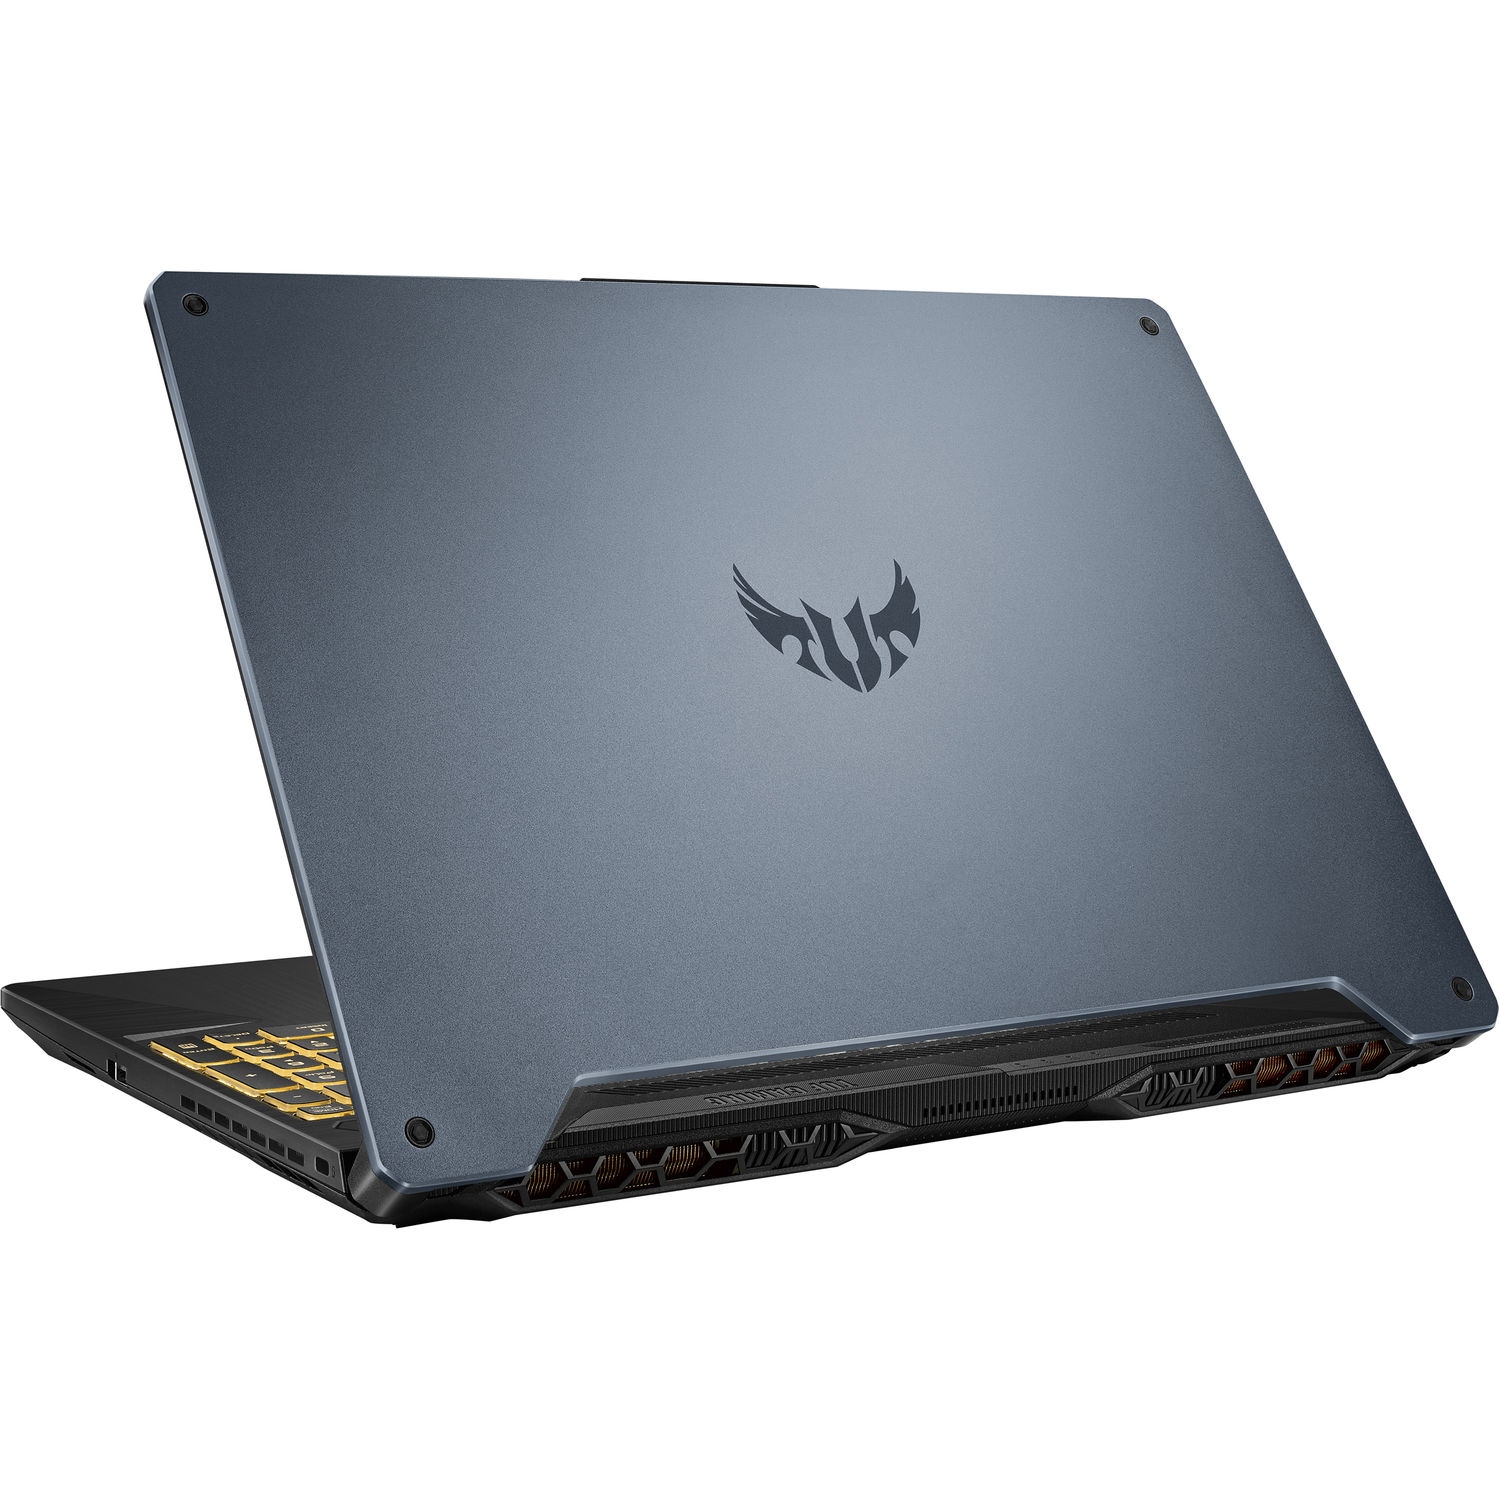 ASUS TUF A15 Gaming and Entertainment Laptop (AMD Ryzen 7 4800H 8-Core, 8GB RAM, 2TB HDD, 15.6" Full HD (1920x1080), NVIDIA GTX 1650 Ti, Wifi, Bluetooth, Webcam, 1xHDMI, Backlit Keyboard, Win 10 Pro) - image 5 of 6